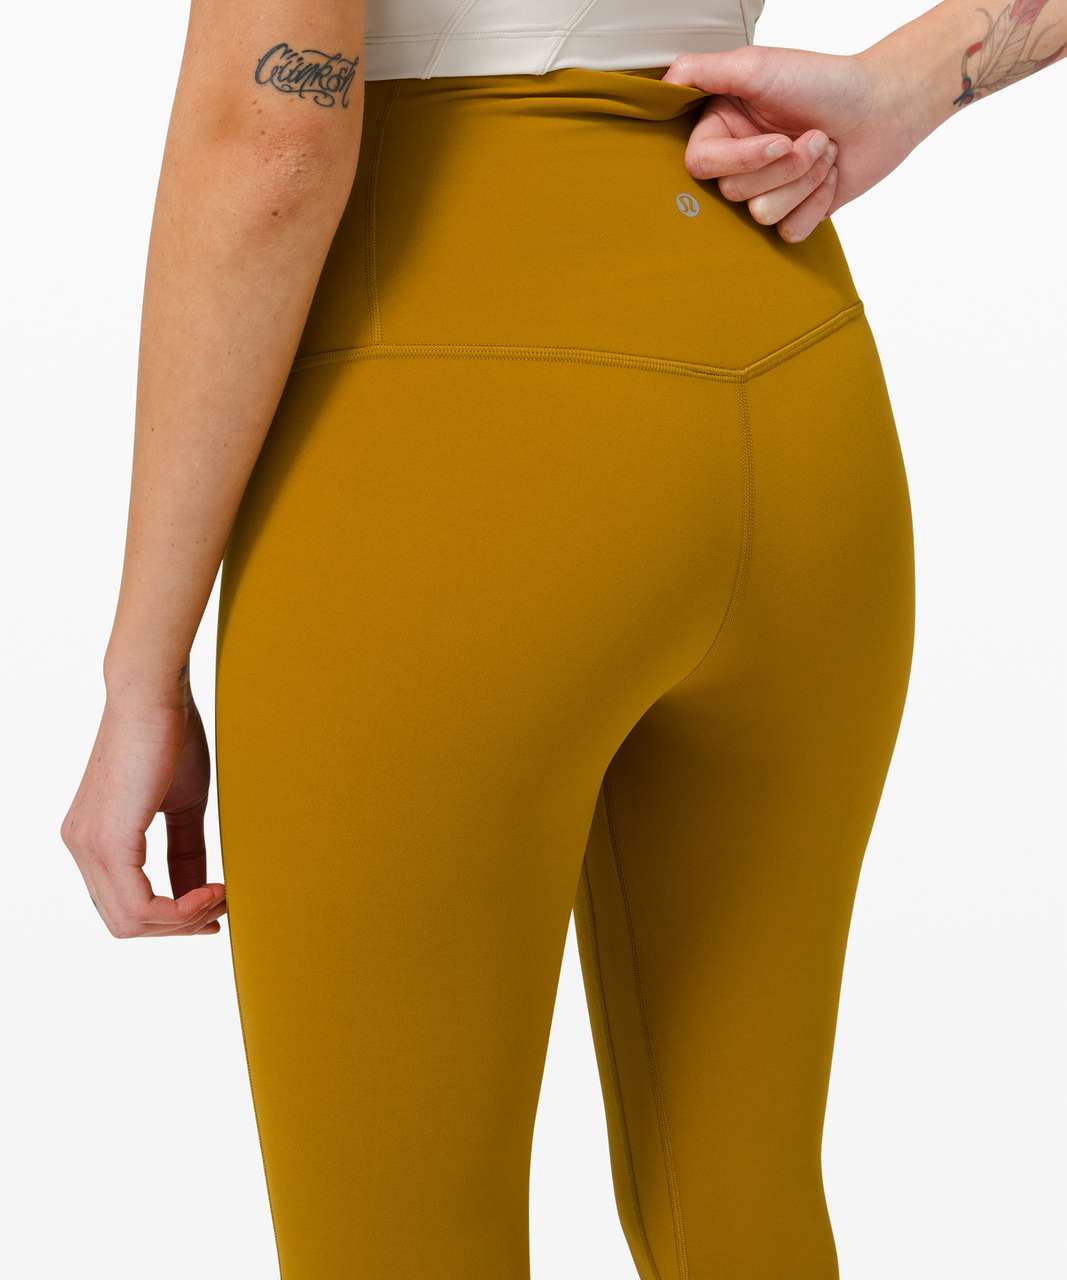 Lululemon Unlimit High-Rise Tight 25" - Gold Spice